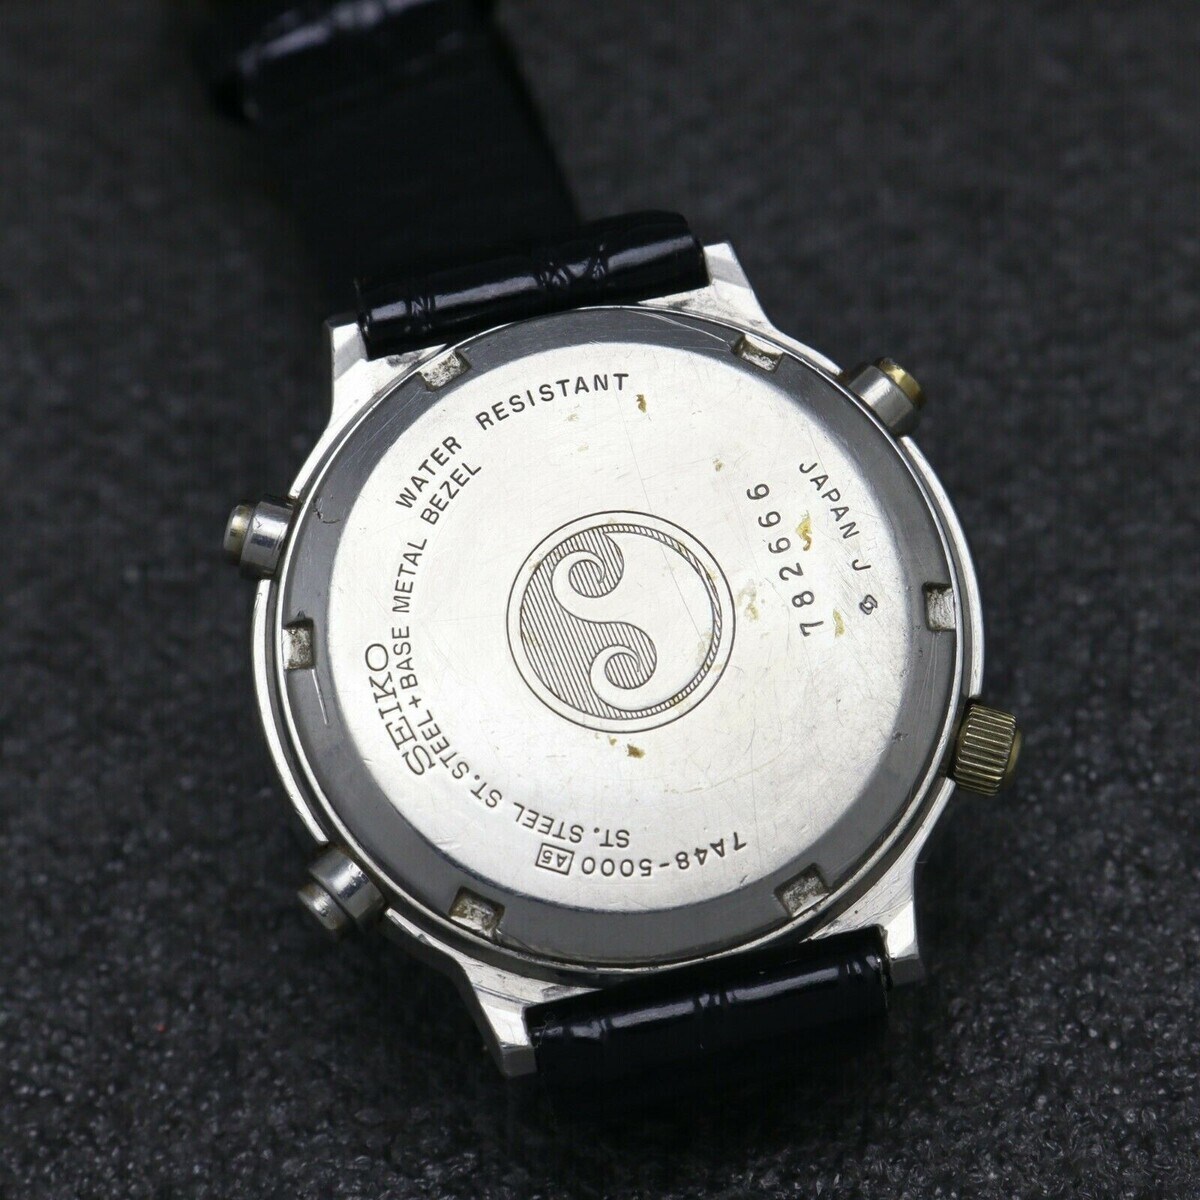 rsz_7a48-5000-stainless-gold-whiteface-leatherstrap-ebay-dec2021-10.jpg